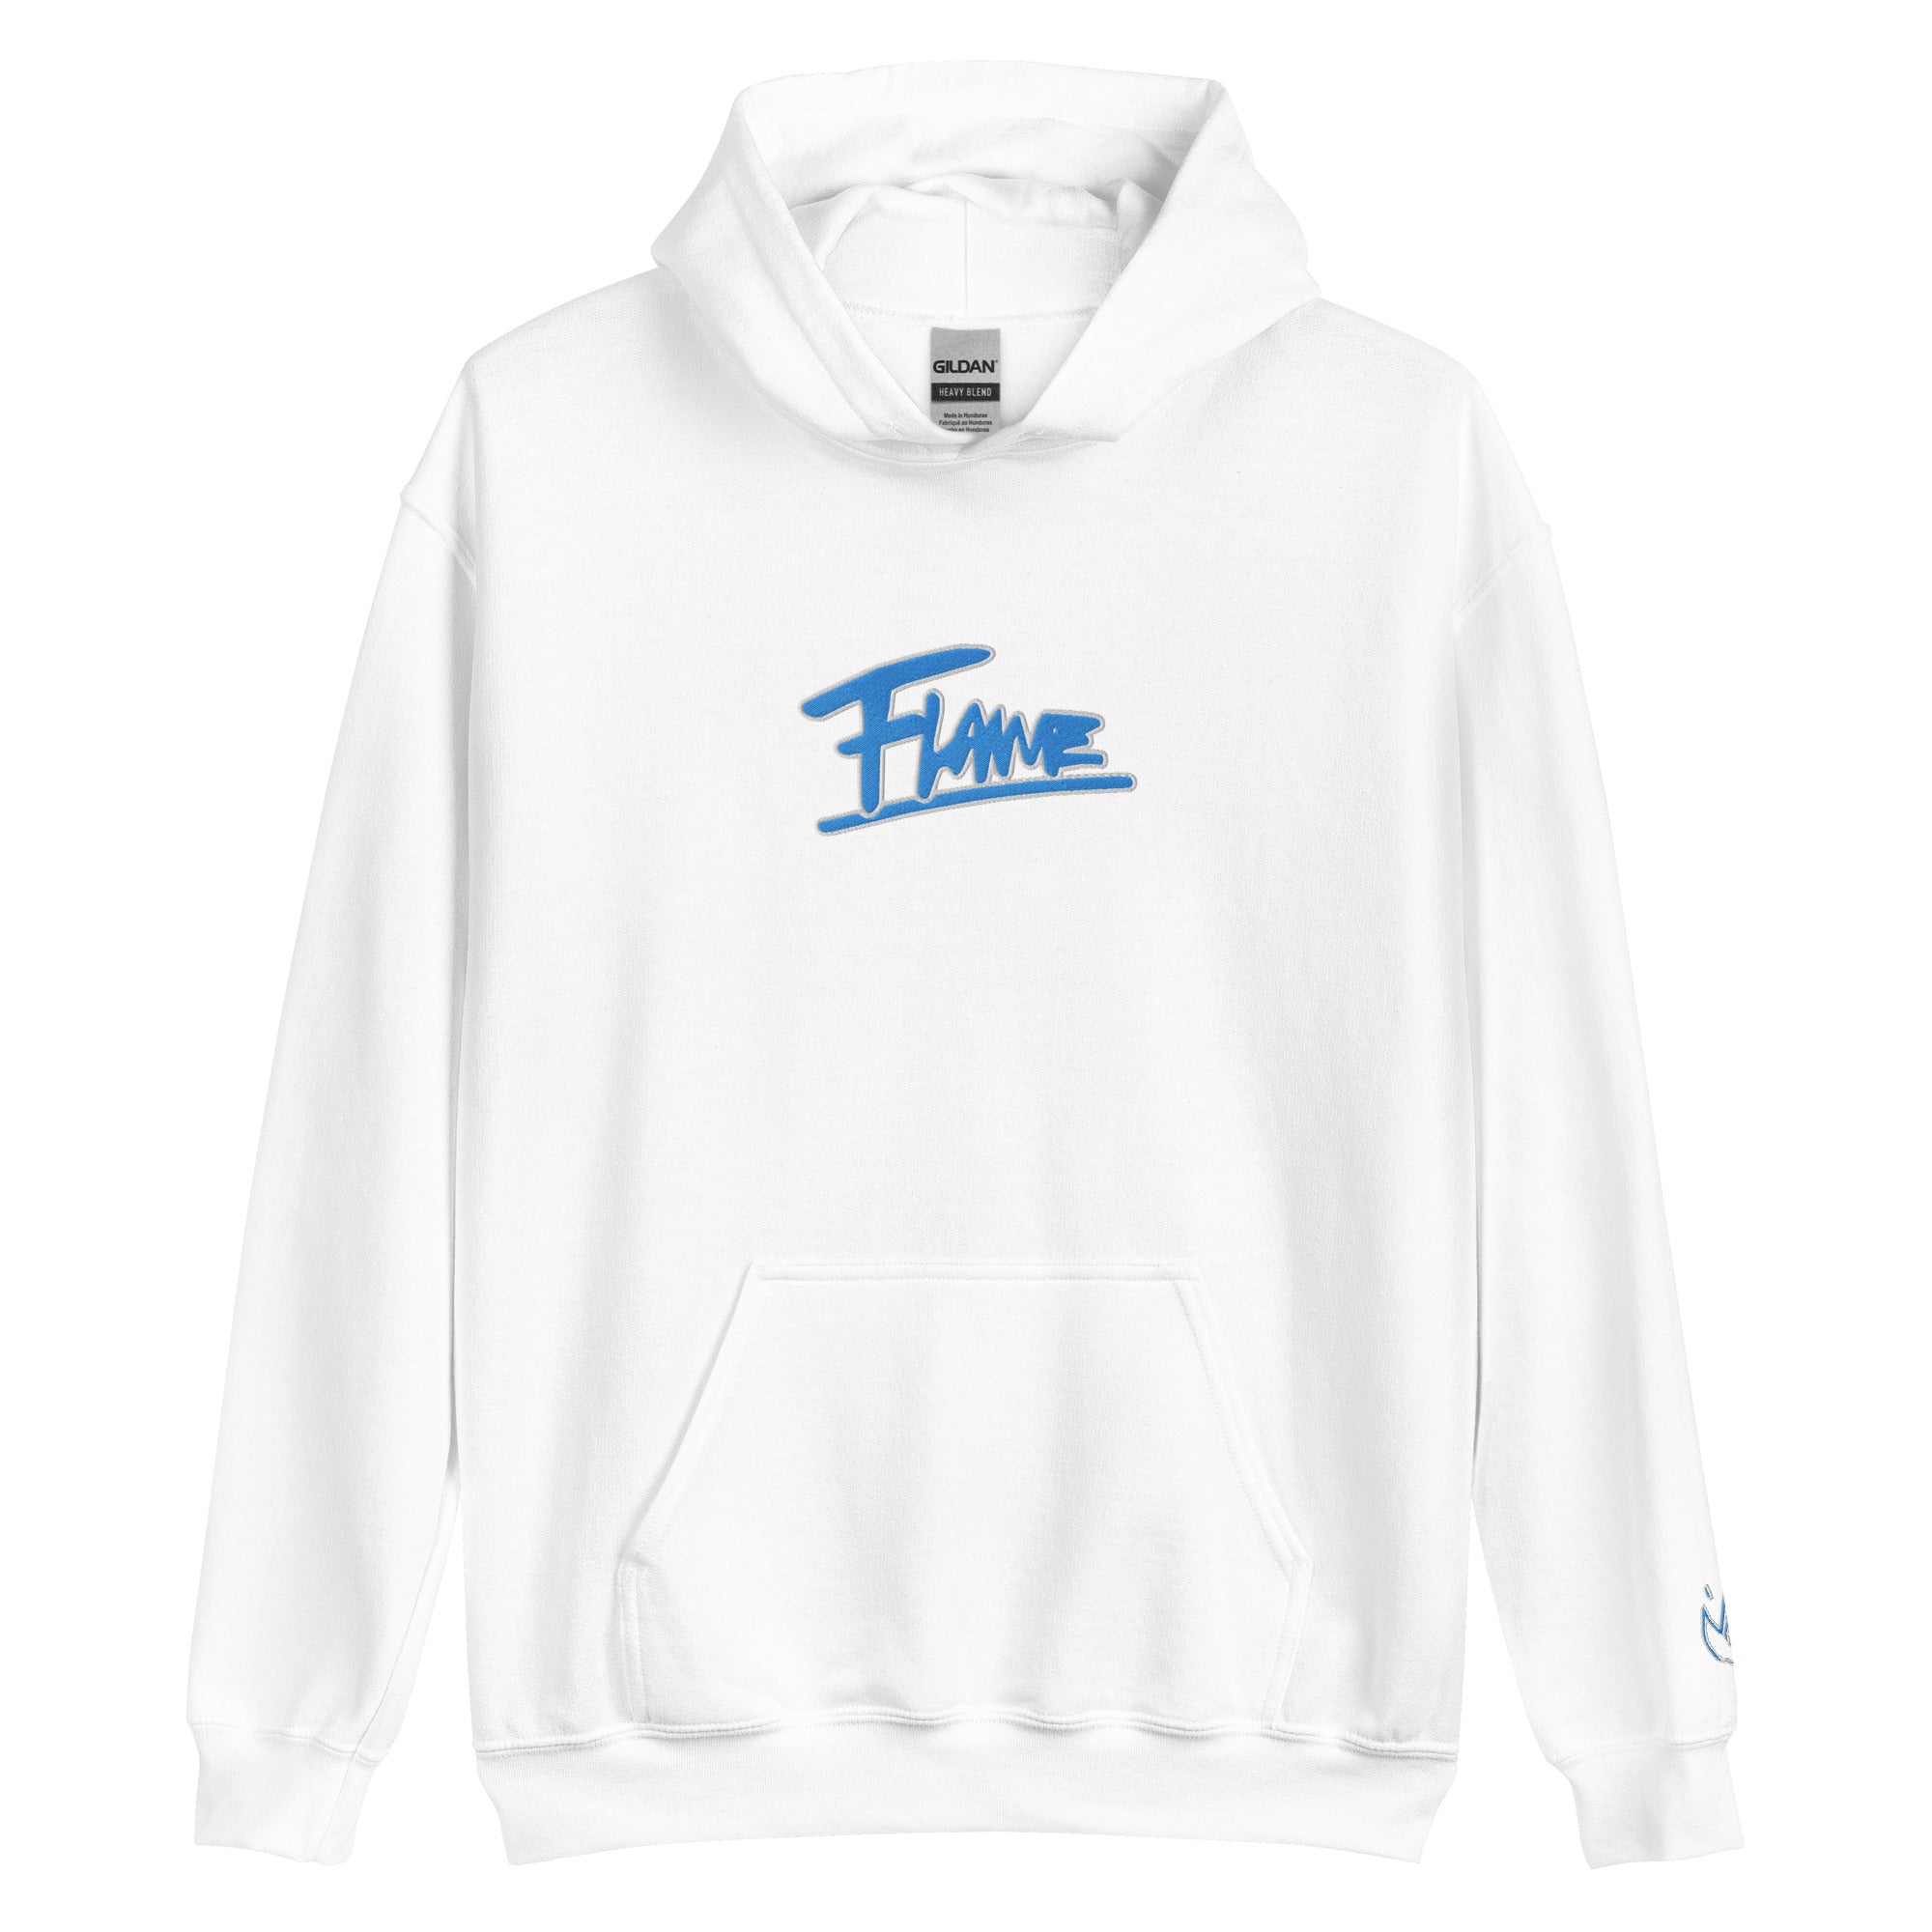 Sudadera con capucha unisex by Flame